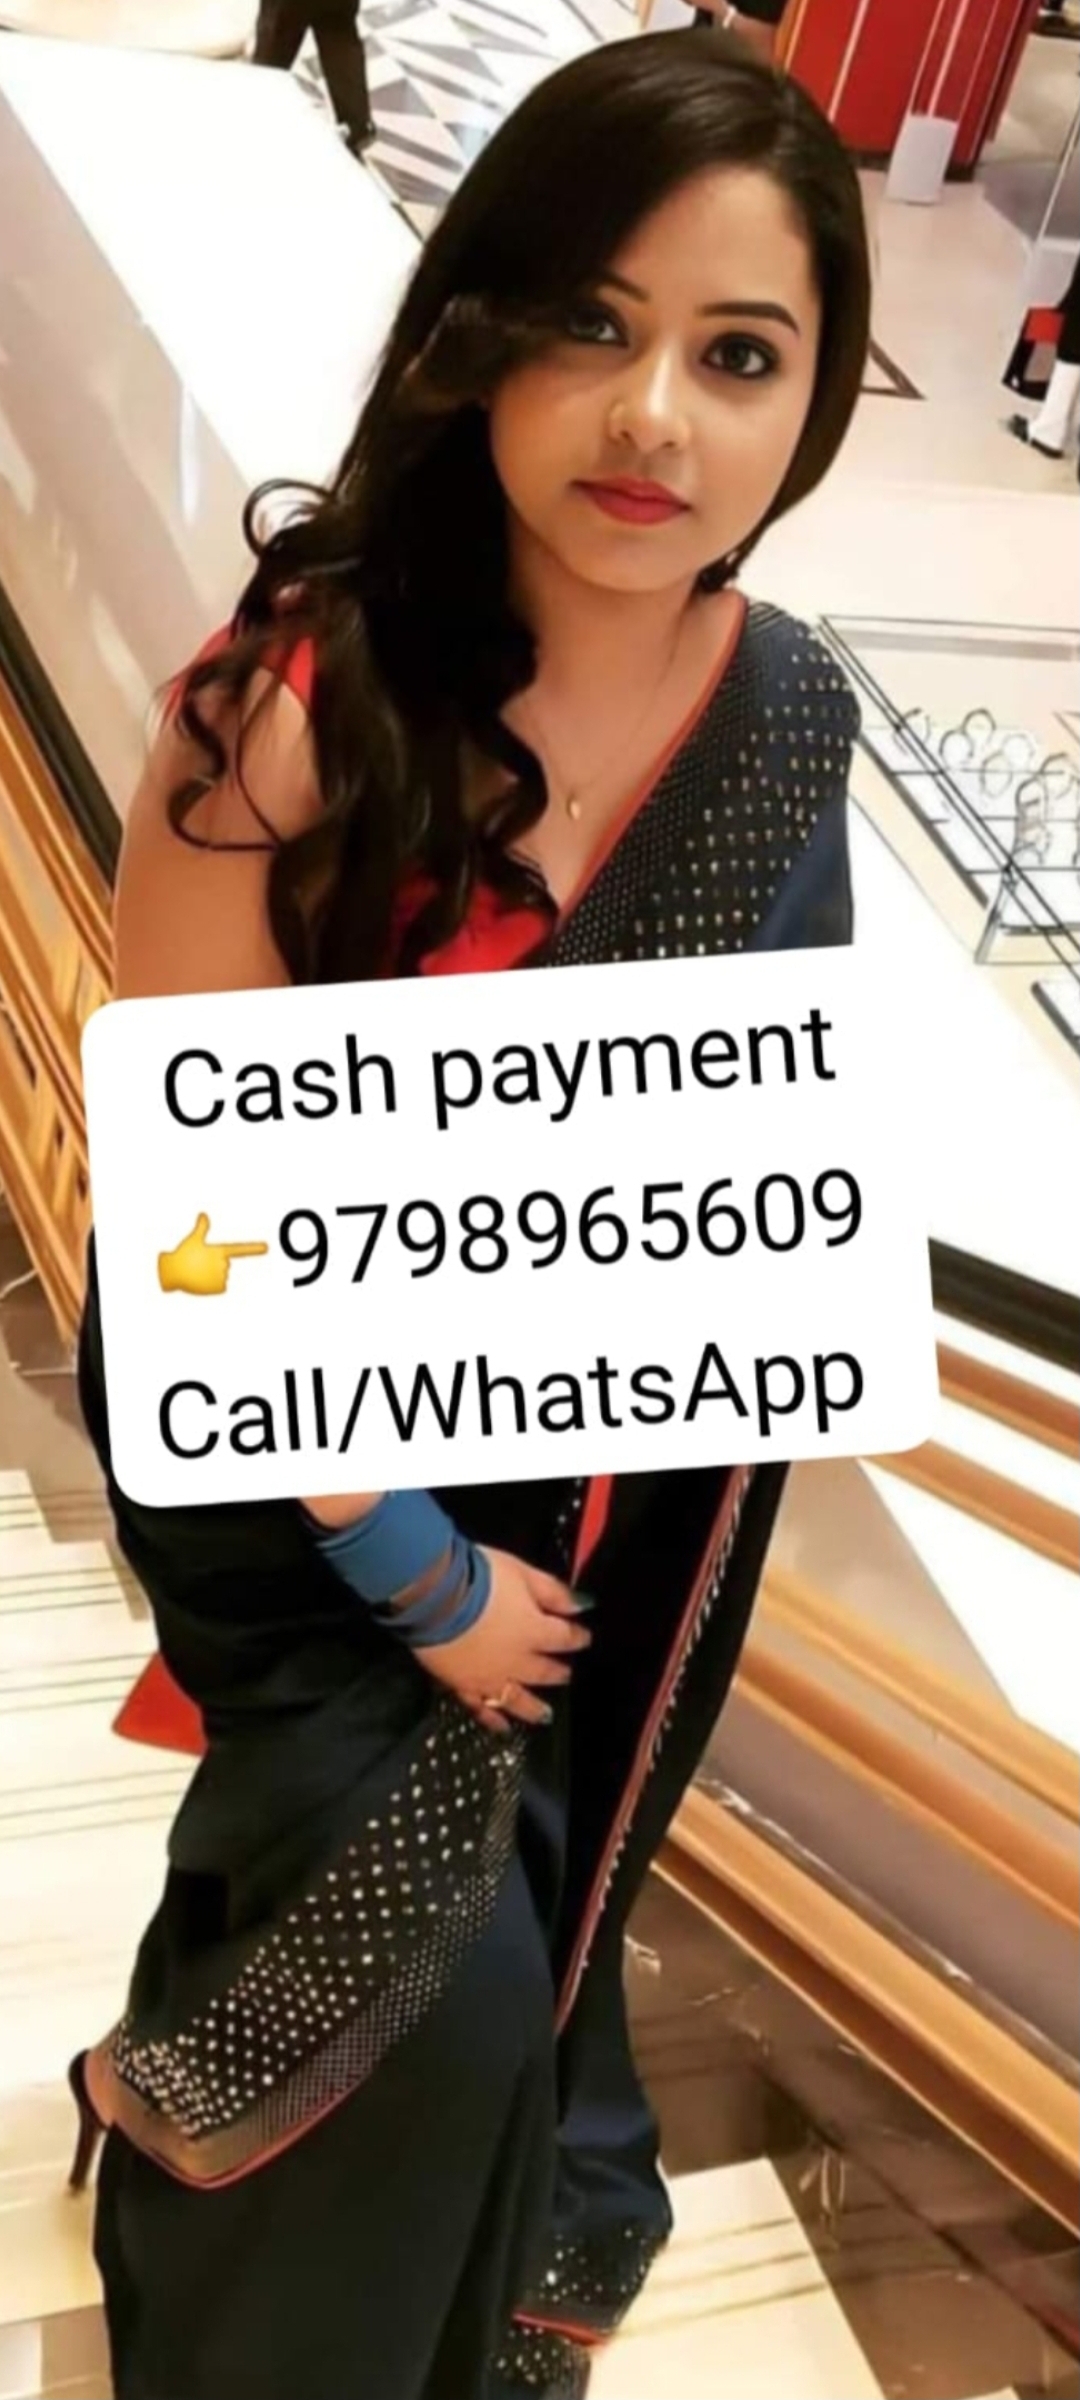 Pimpri chinchwad in VIP model college girl anytime available service 